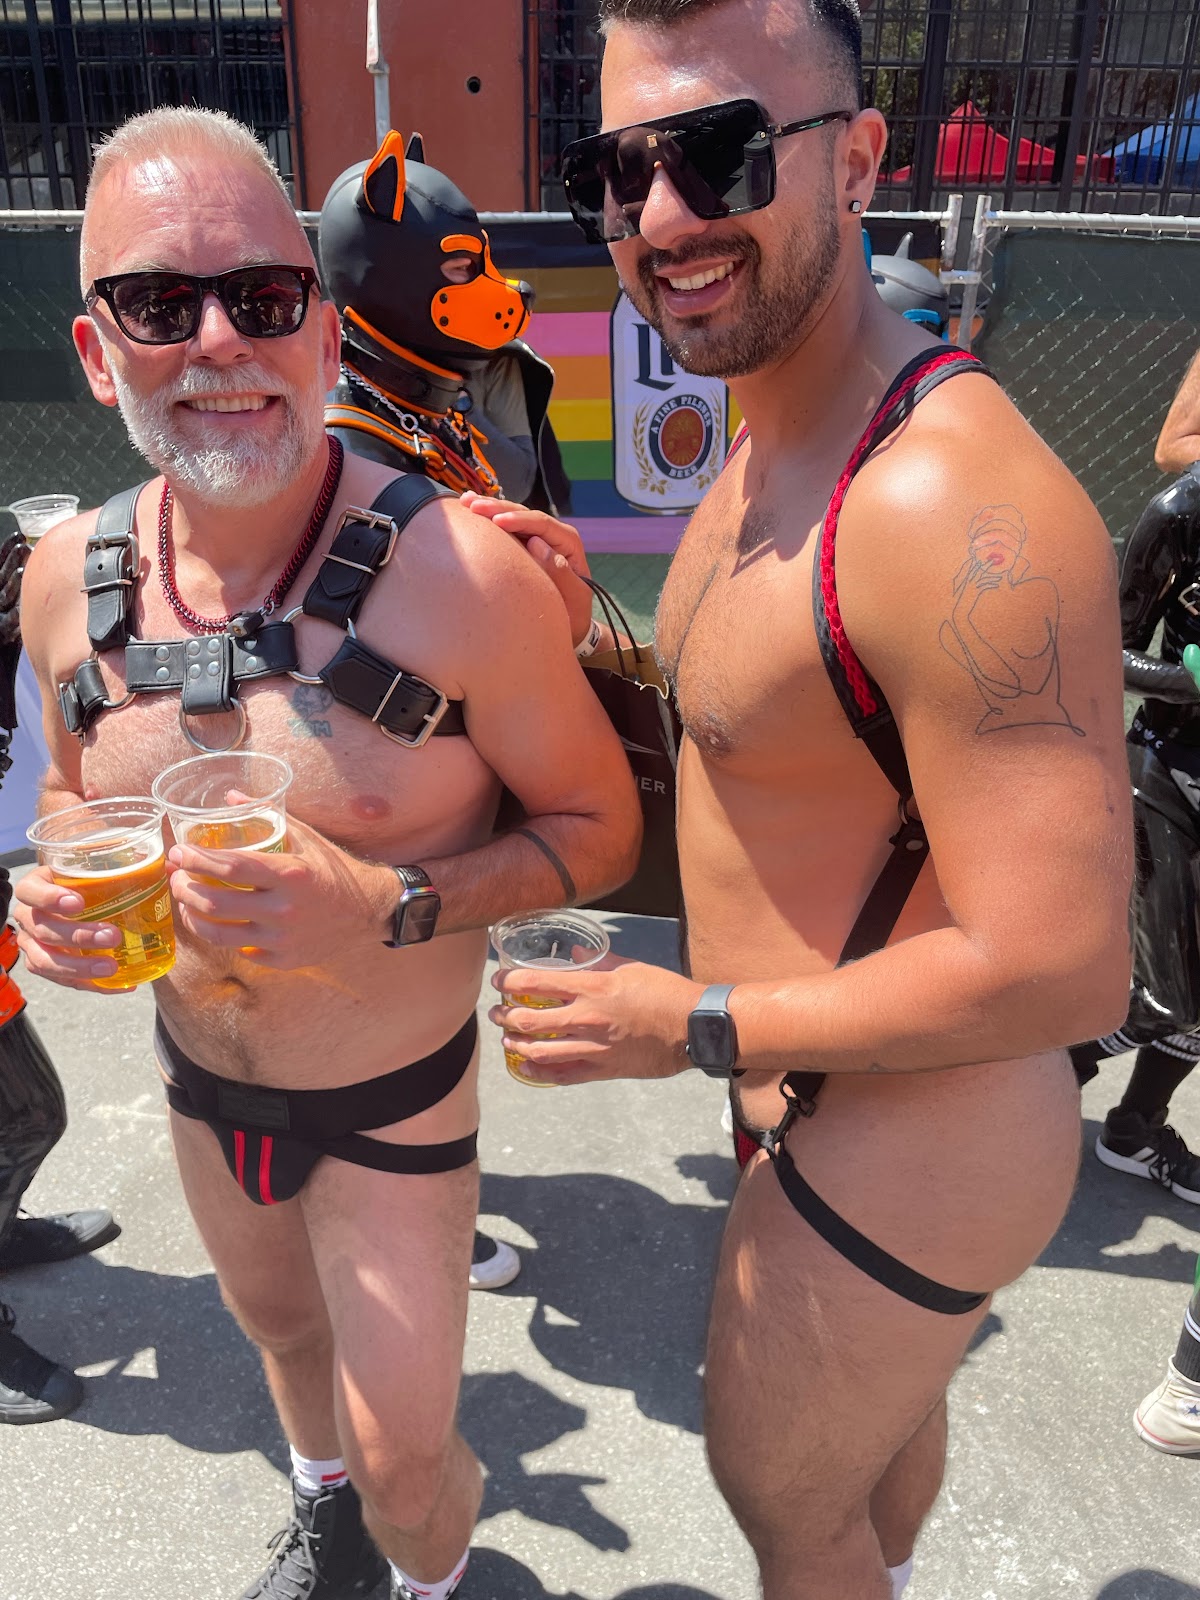 A hairy muscle cub and gay hairy leather daddy drinking beer outside at Dore Alley 2023